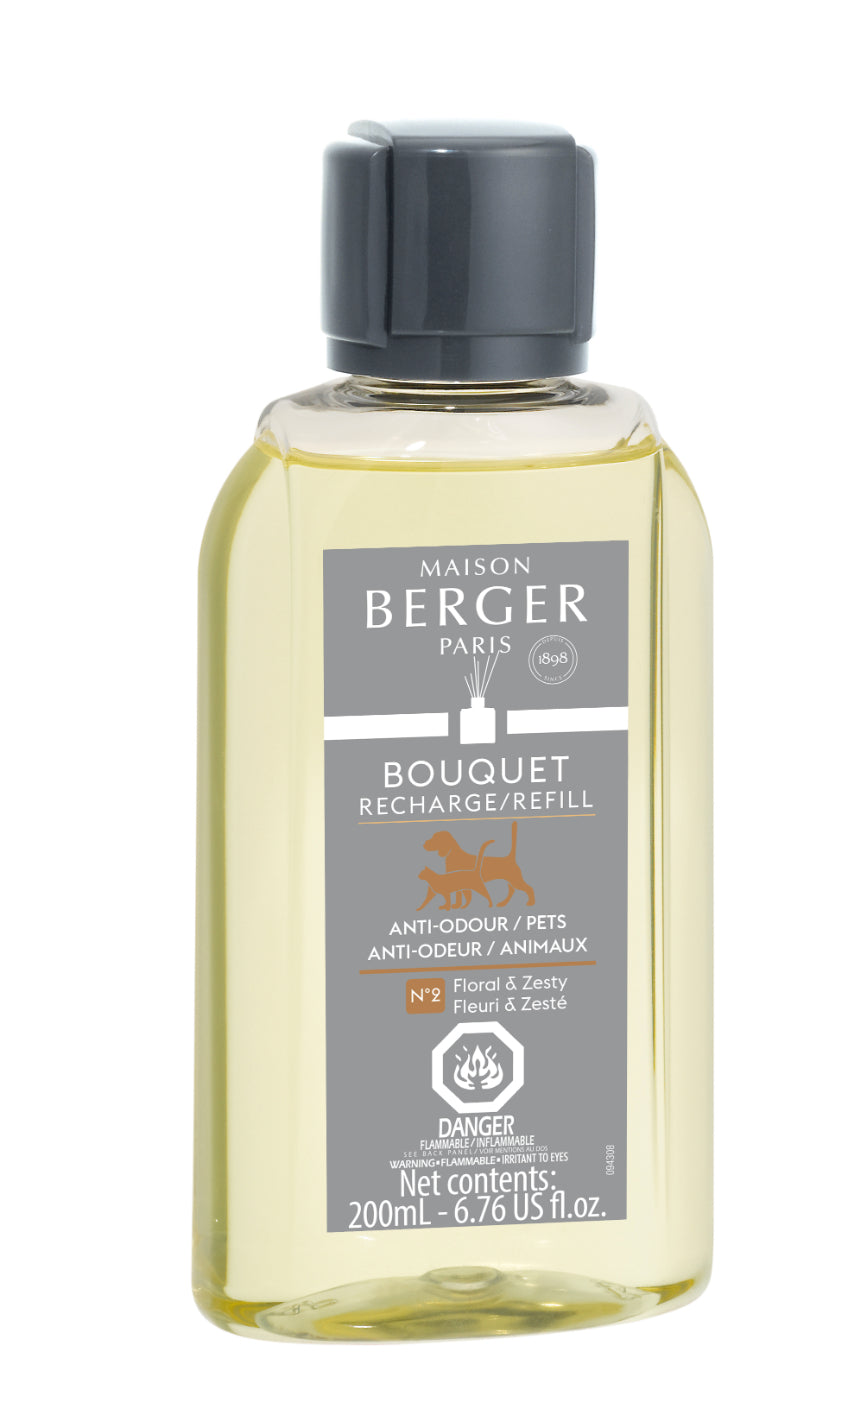 Maison Berger Reed Diffuser Refill Anti-Odour Pet 2 (Floral & Zesty)